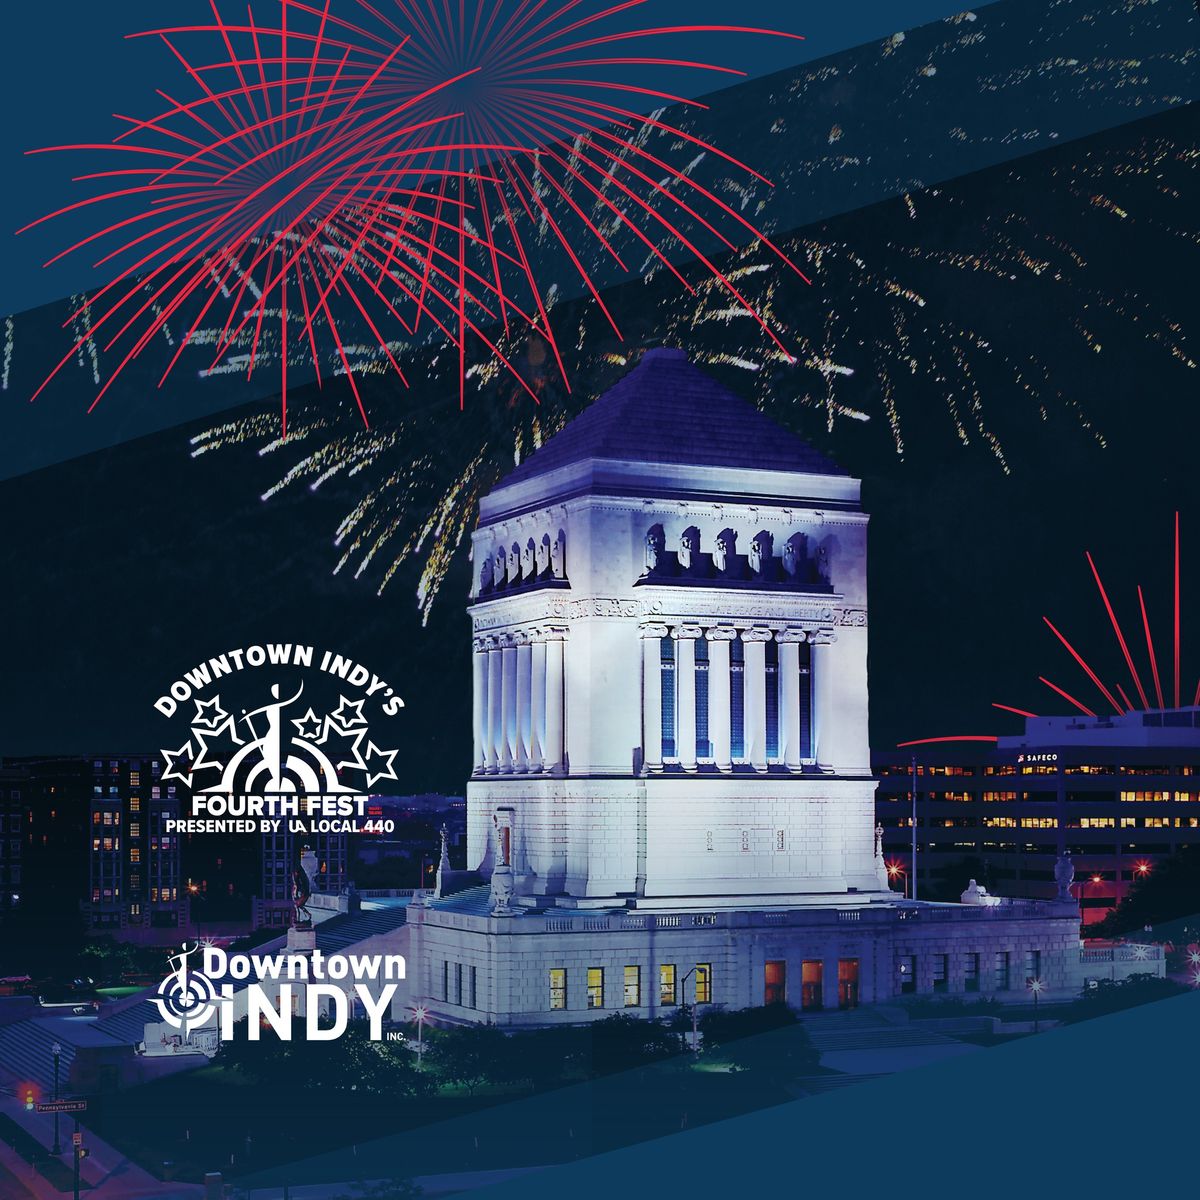 Downtown Indy's Fourth Fest presented by UA Local 440